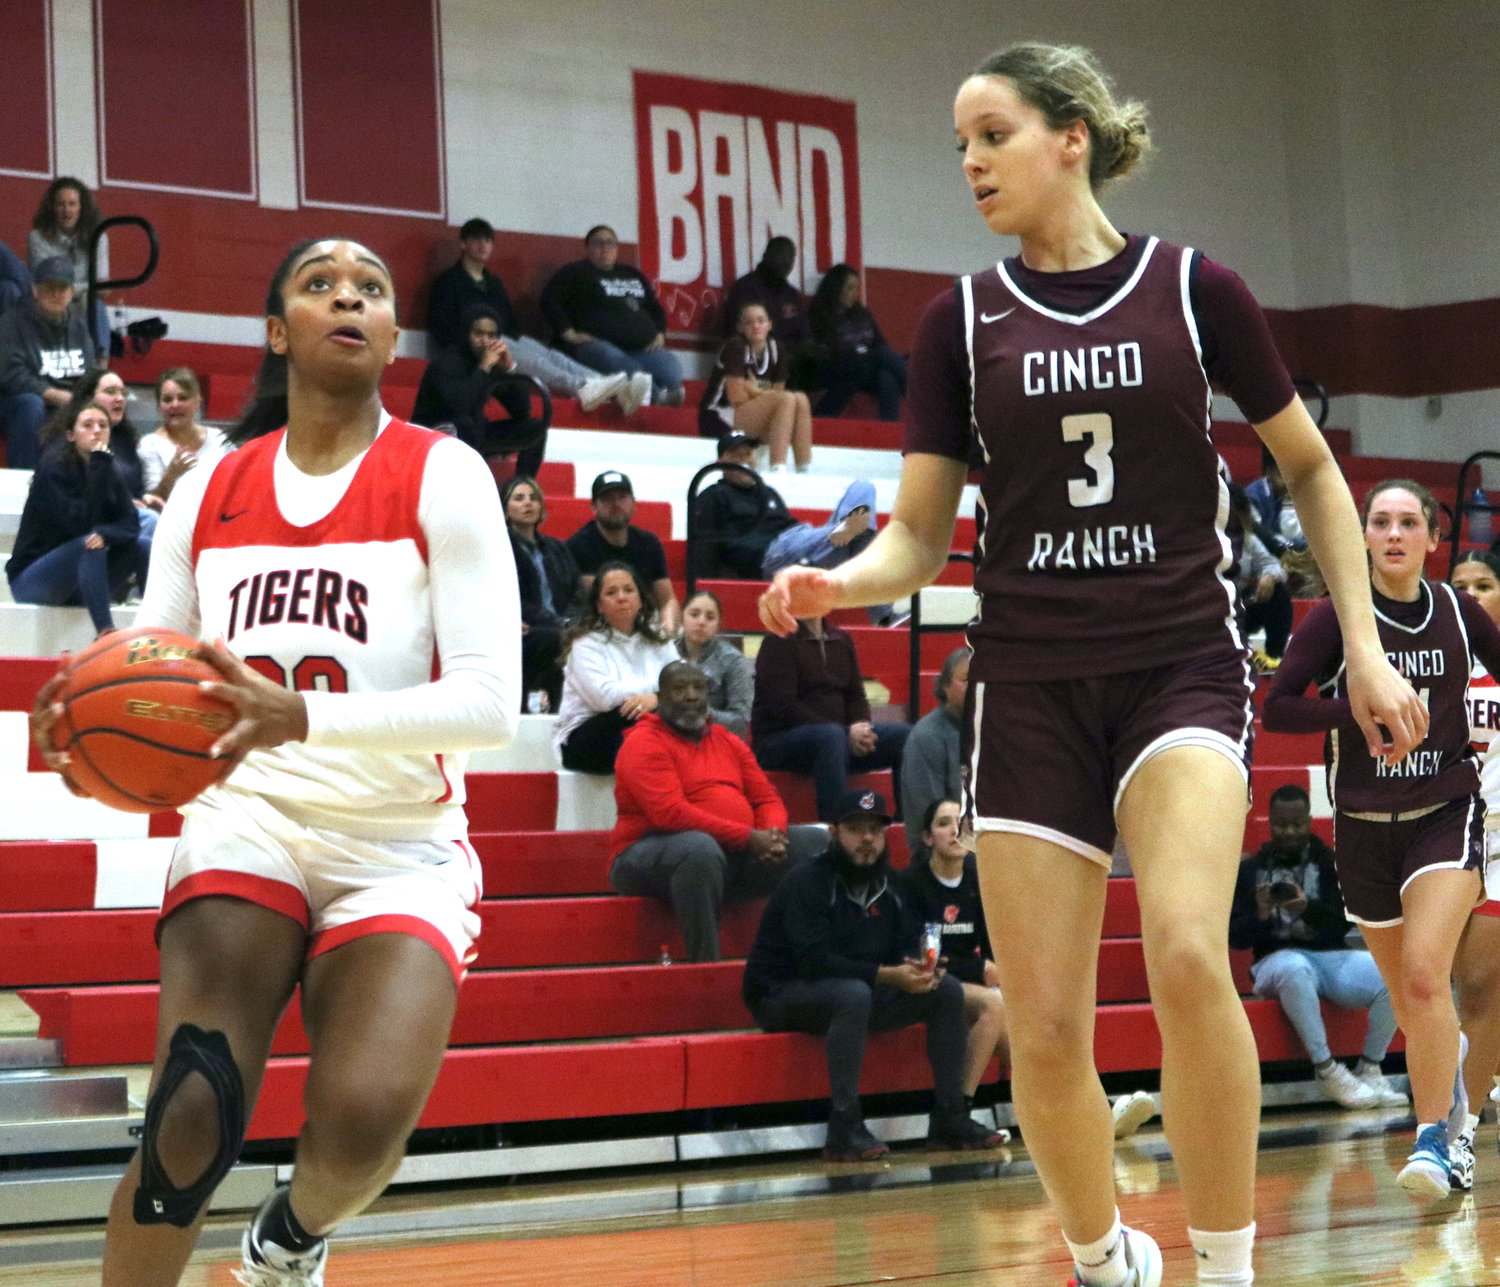 Lyric Barr drives past a defender during Tuesday’s game between Katy and Cinco Ranch at the Katy gym.